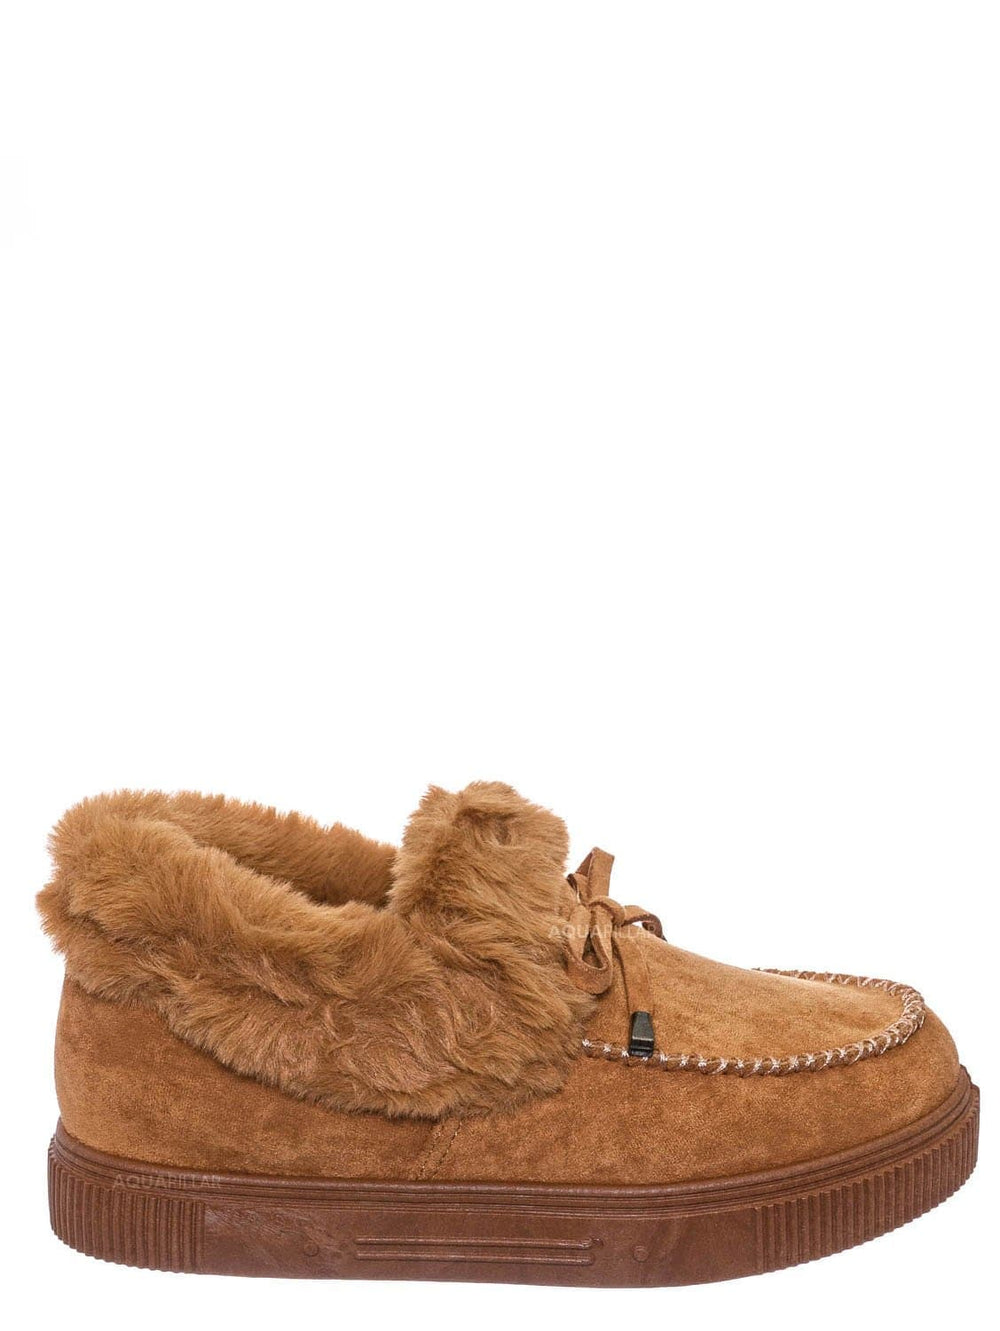 ankle moccasins with fur